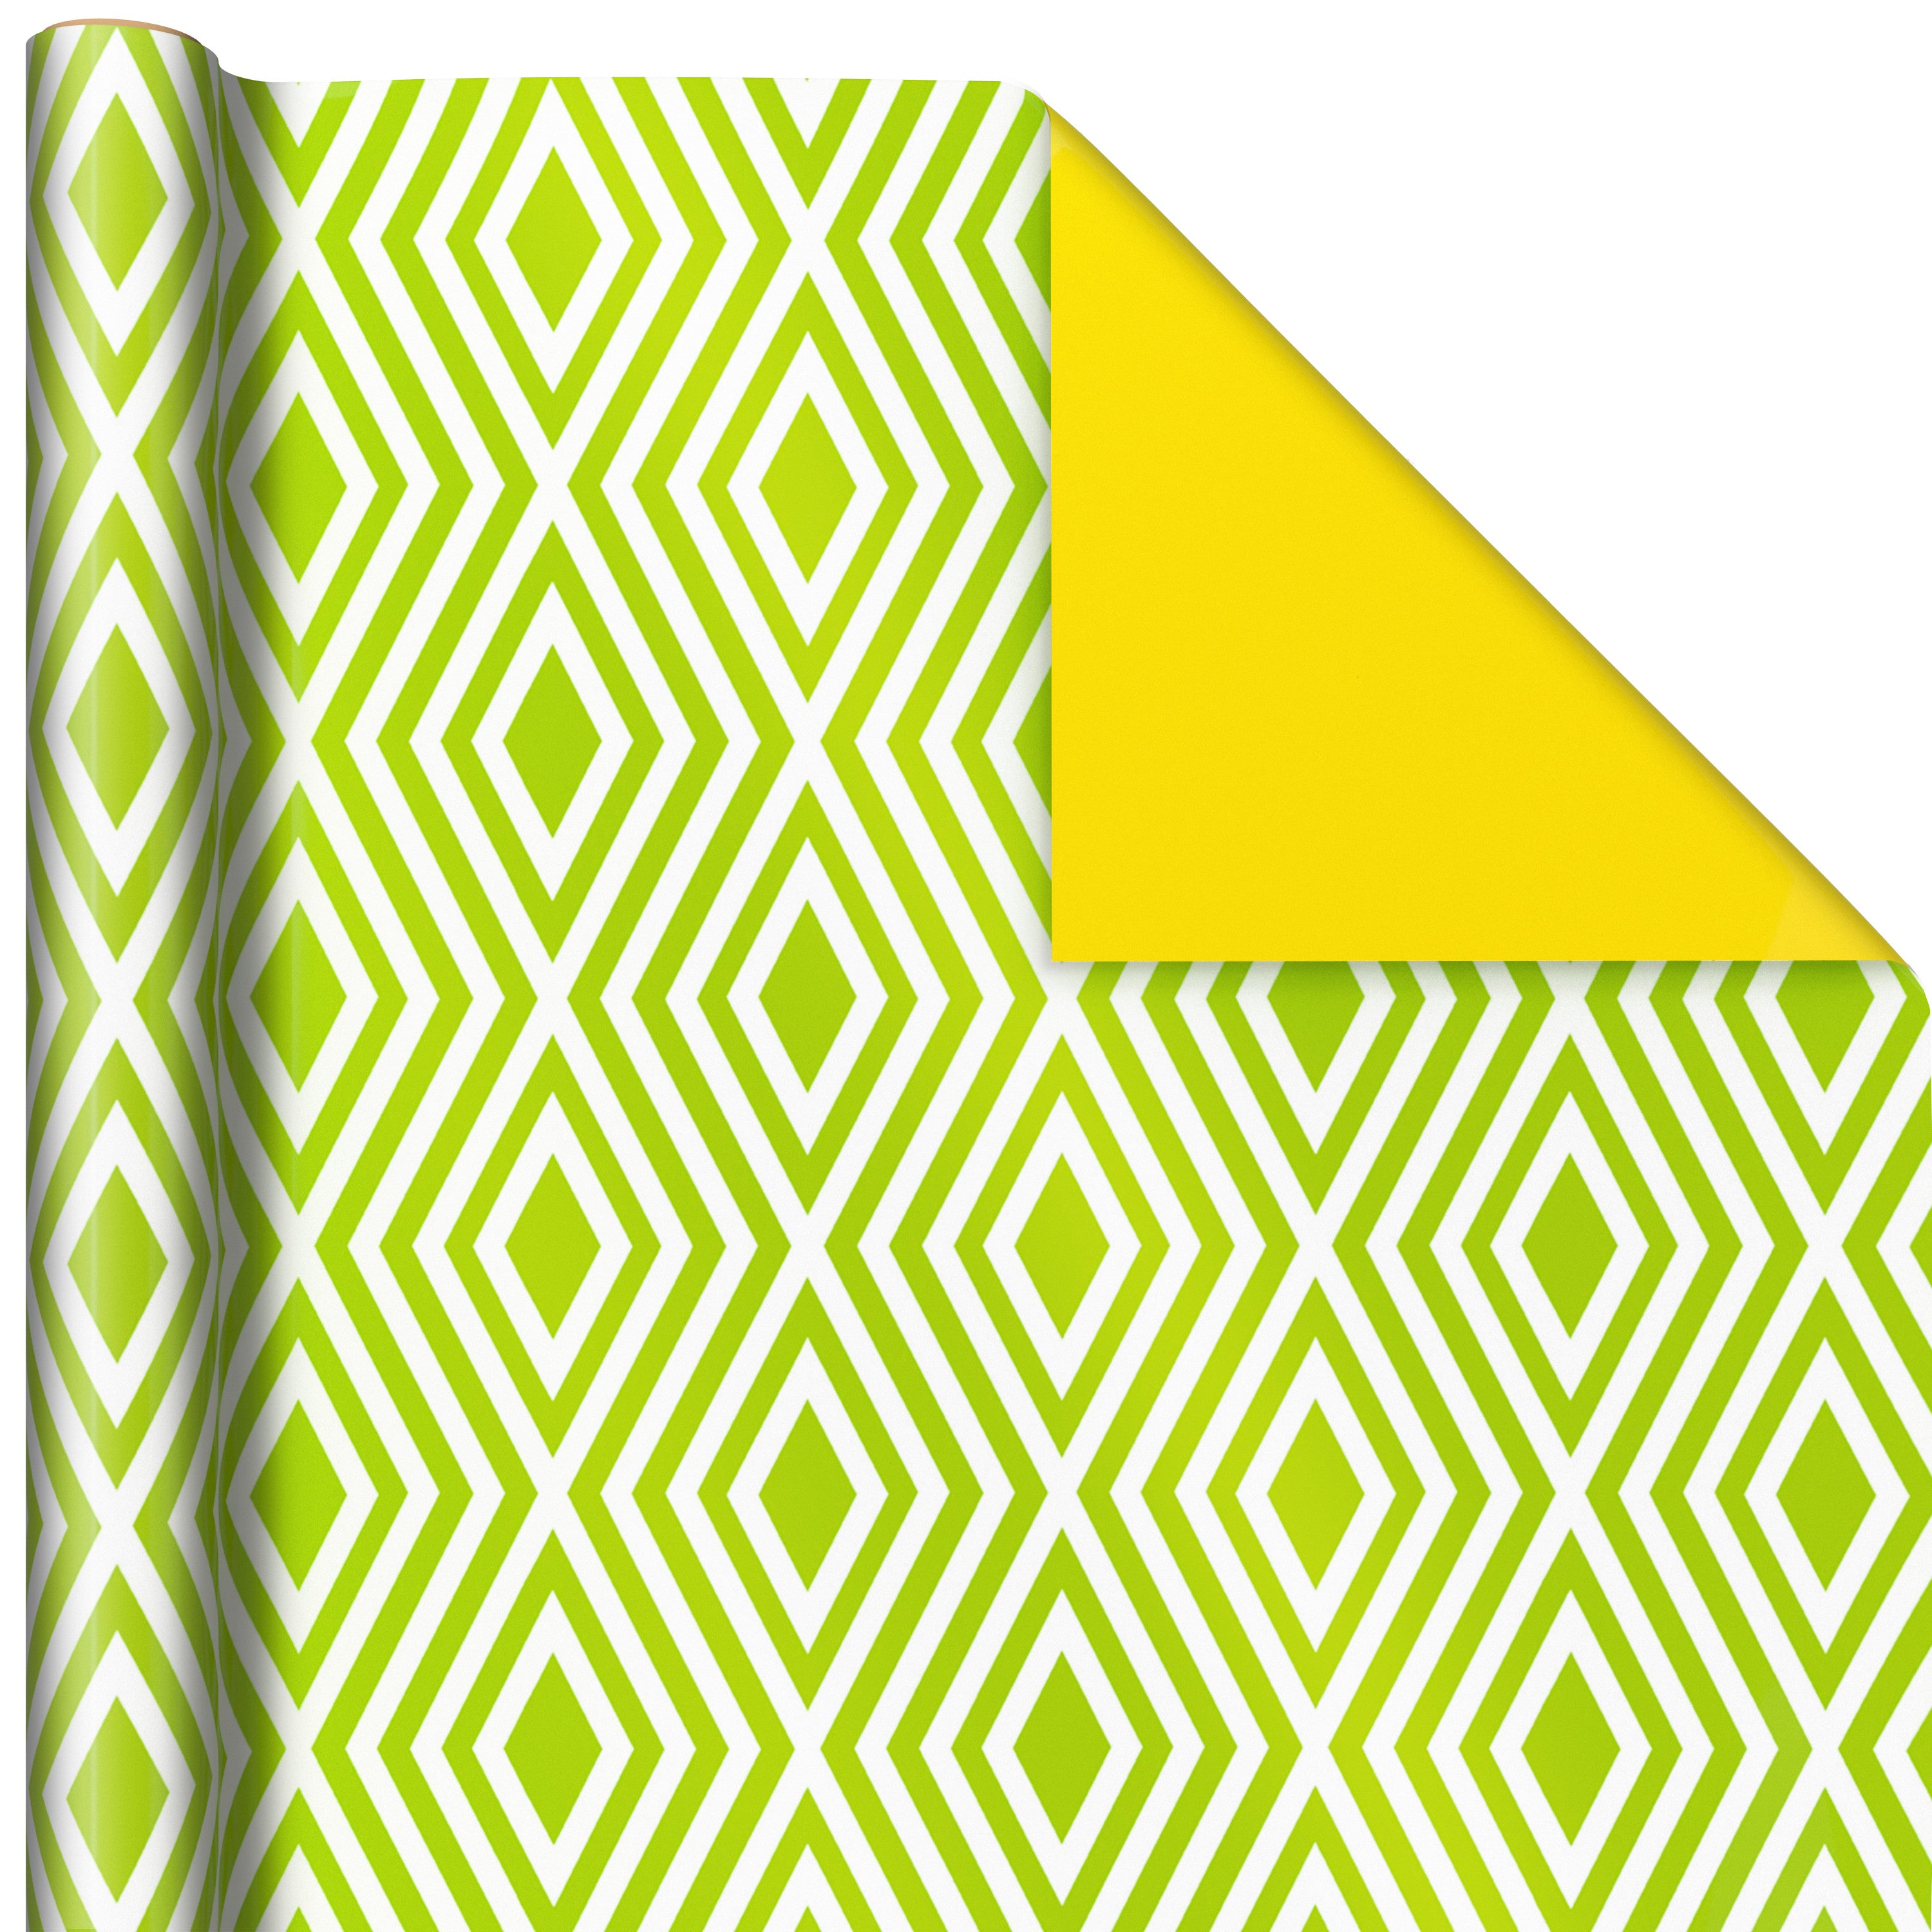 Hallmark All Occasion Reversible Wrapping Paper Bundle - Solids & Dots, Diamonds, Triangles (3 Rolls; 75 sq. ft. ttl) Yellow, Orange, Blue, Black and White